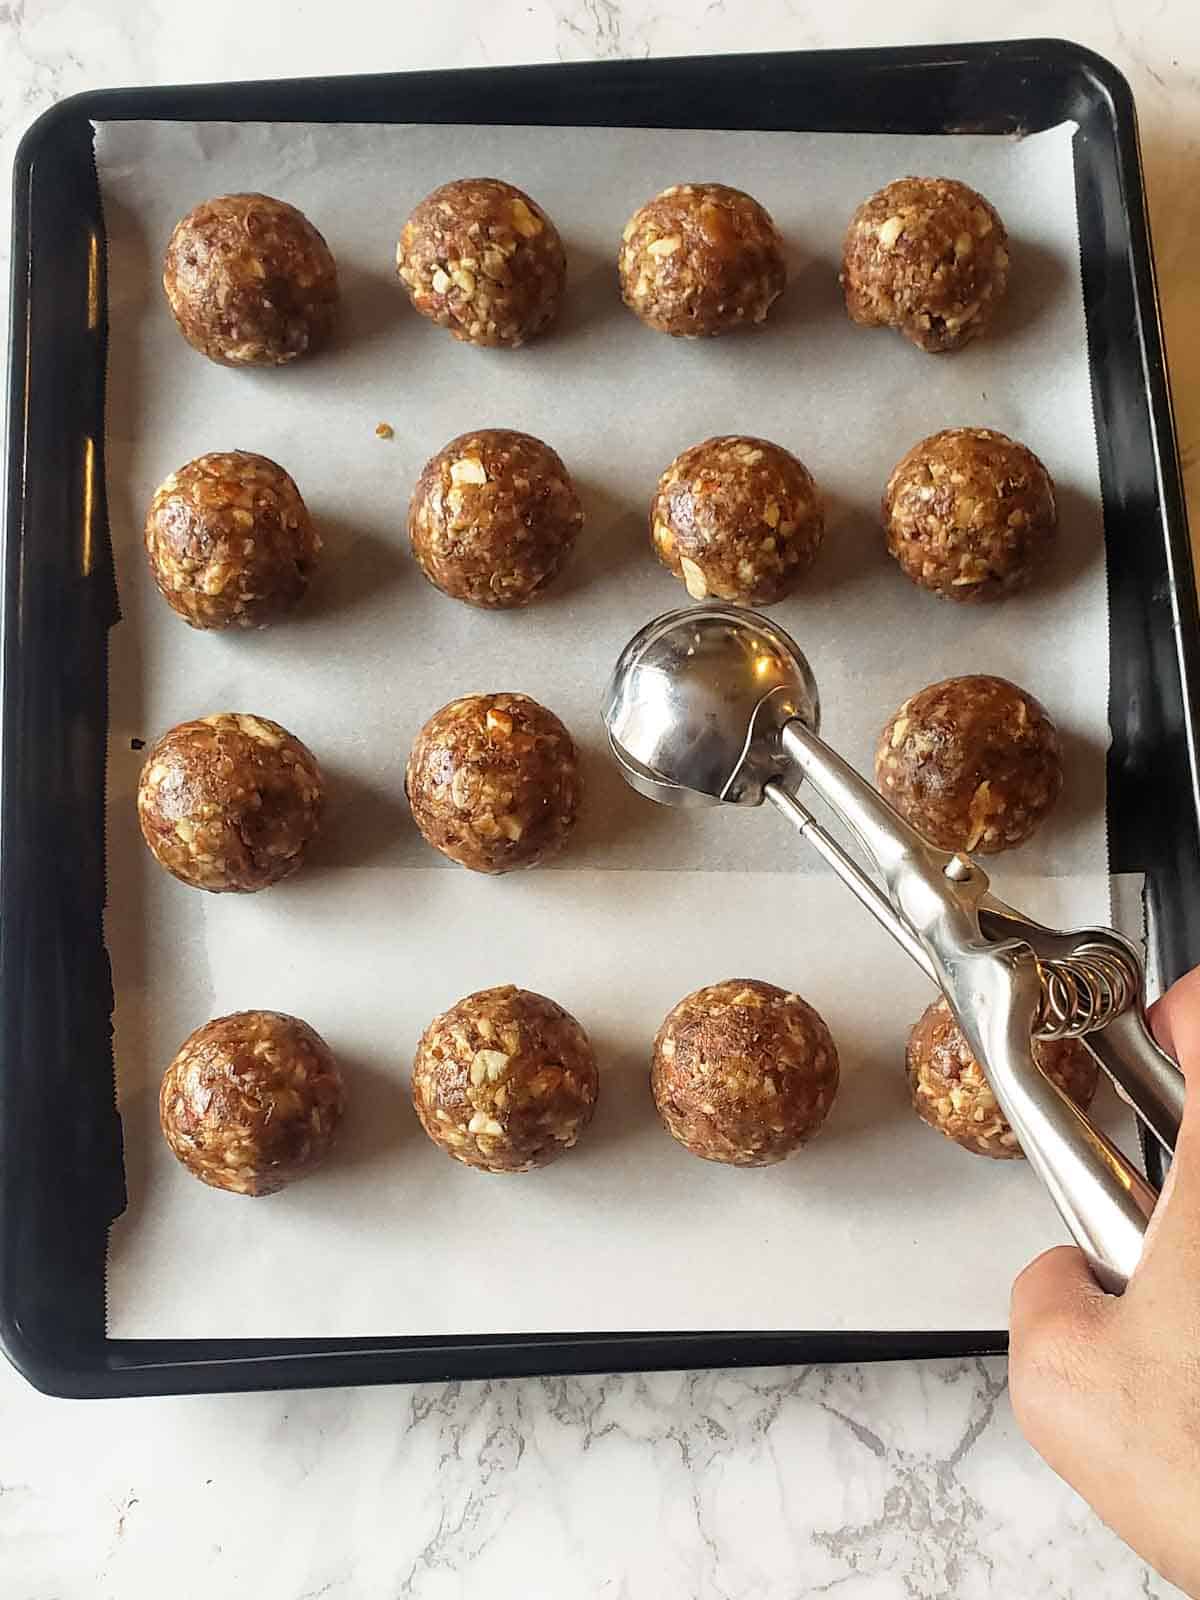 A cookie scoop dropping the energy ball dough on the baking sheet.